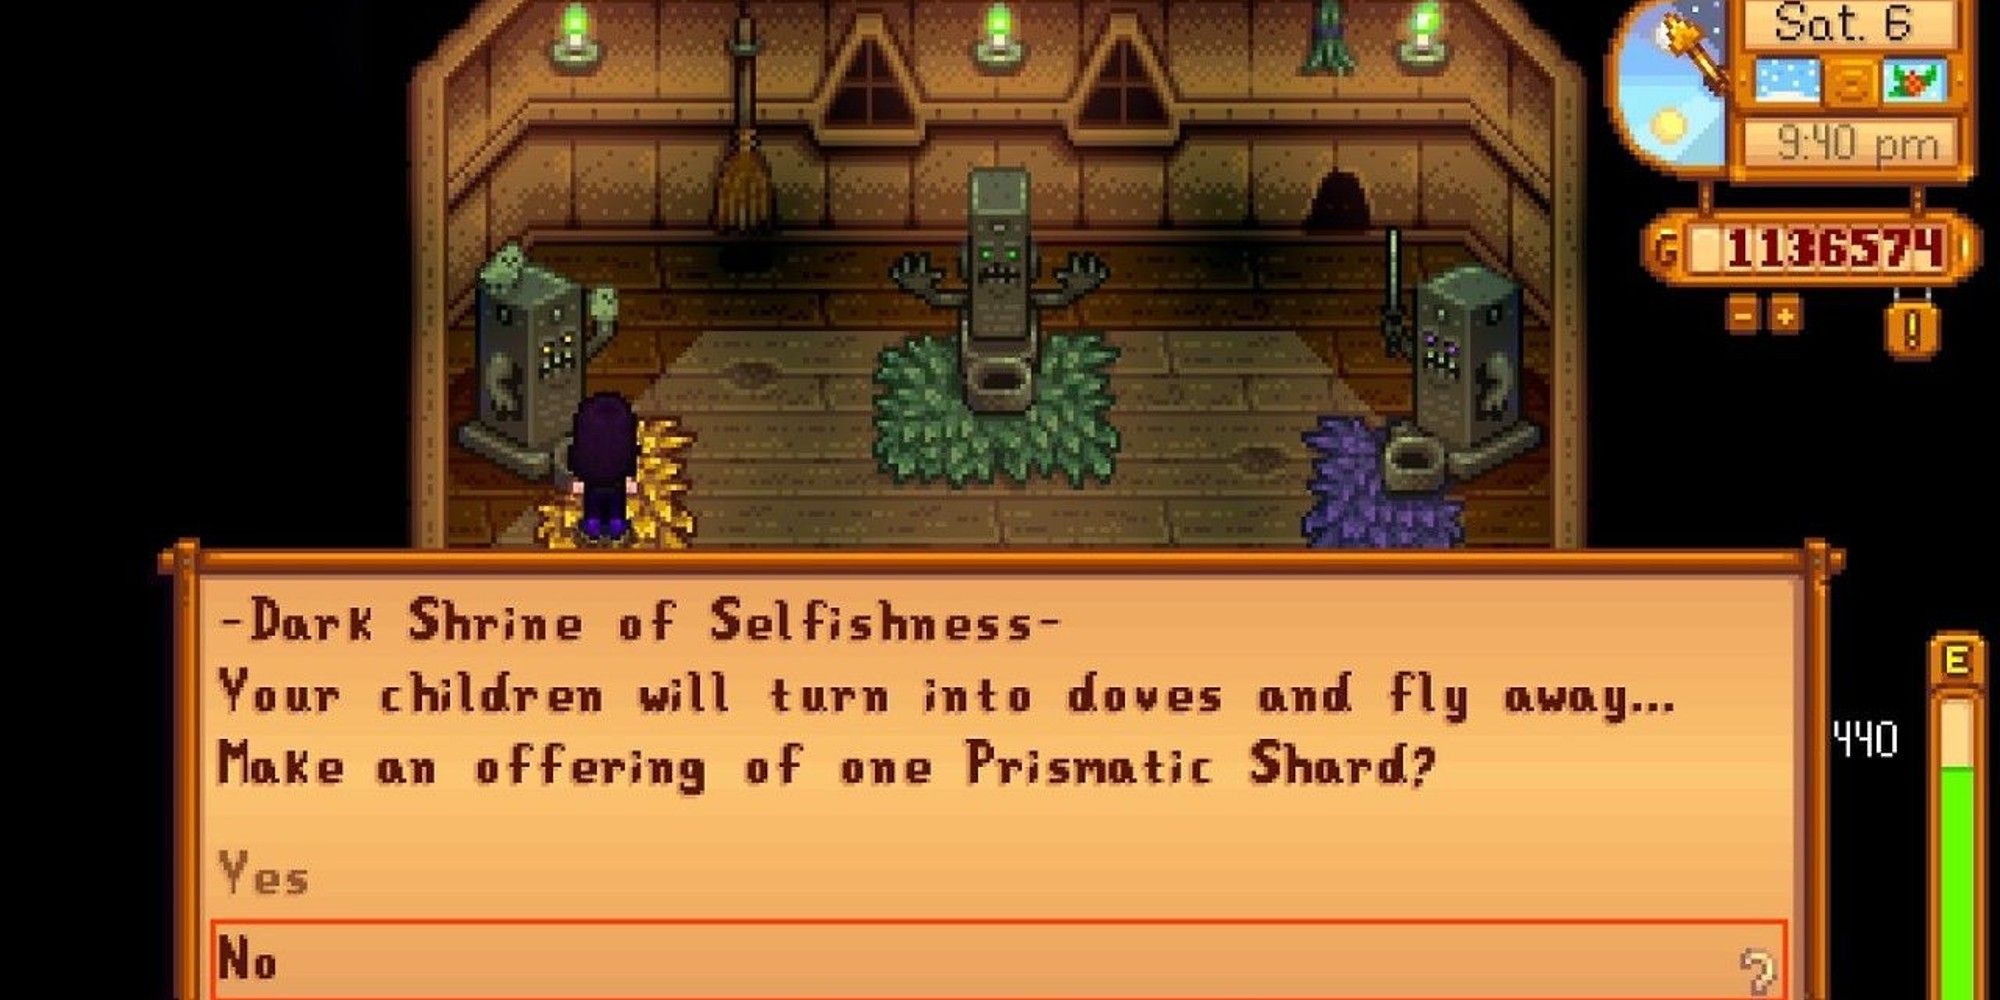 Stardew Valley Shrine Of Selfishness Dialogue Box, option to turn children into dove